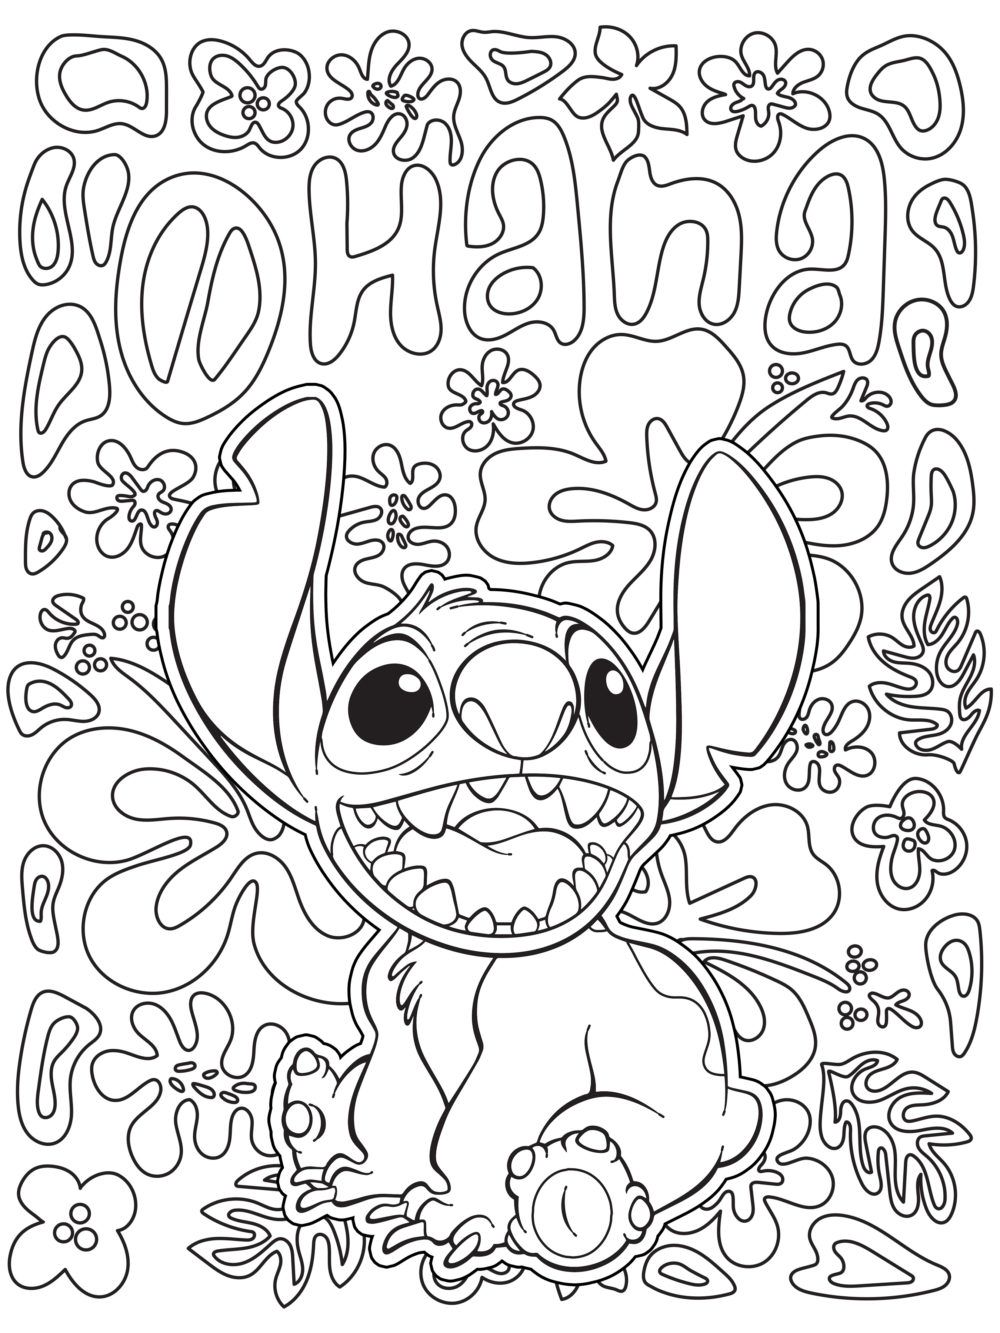 20 Printable Disney Coloring Sheets So You Can FINALLY Have a Few ...